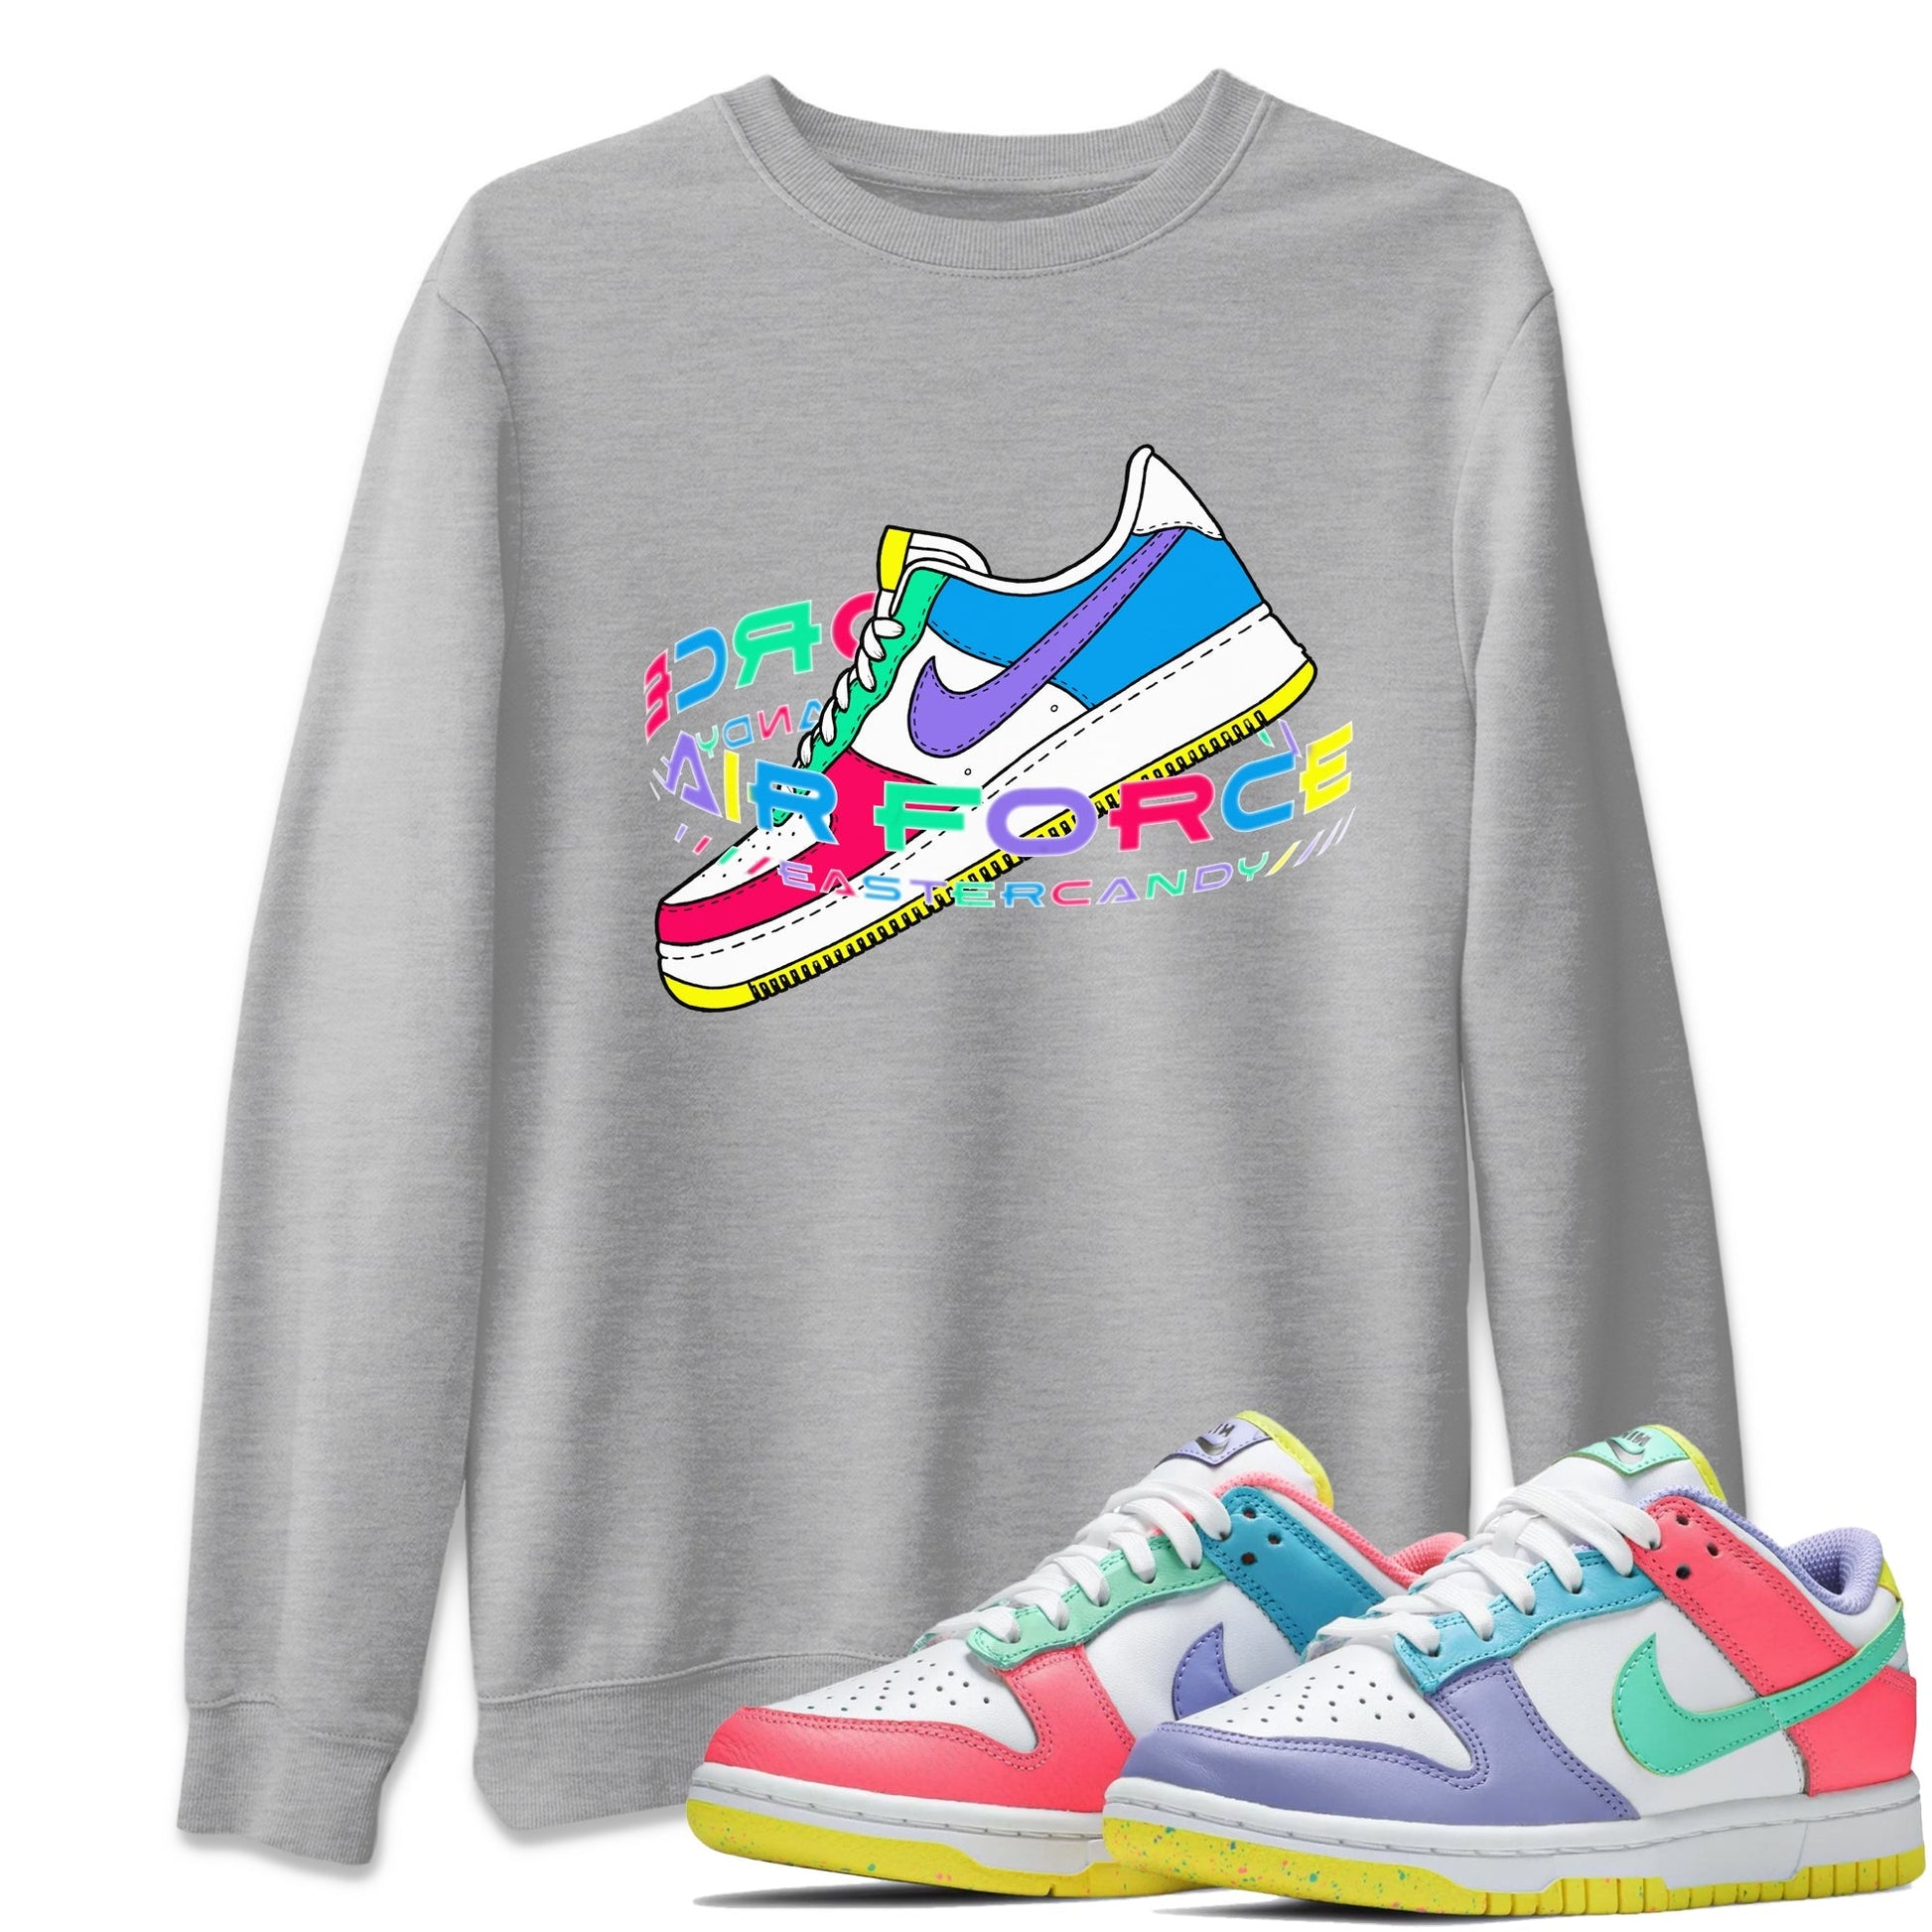 Dunk Easter Candy Sneaker Tees Drip Gear Zone Warping Space Sneaker Tees Nike Easter Shirt Unisex Shirts Heather Grey 1